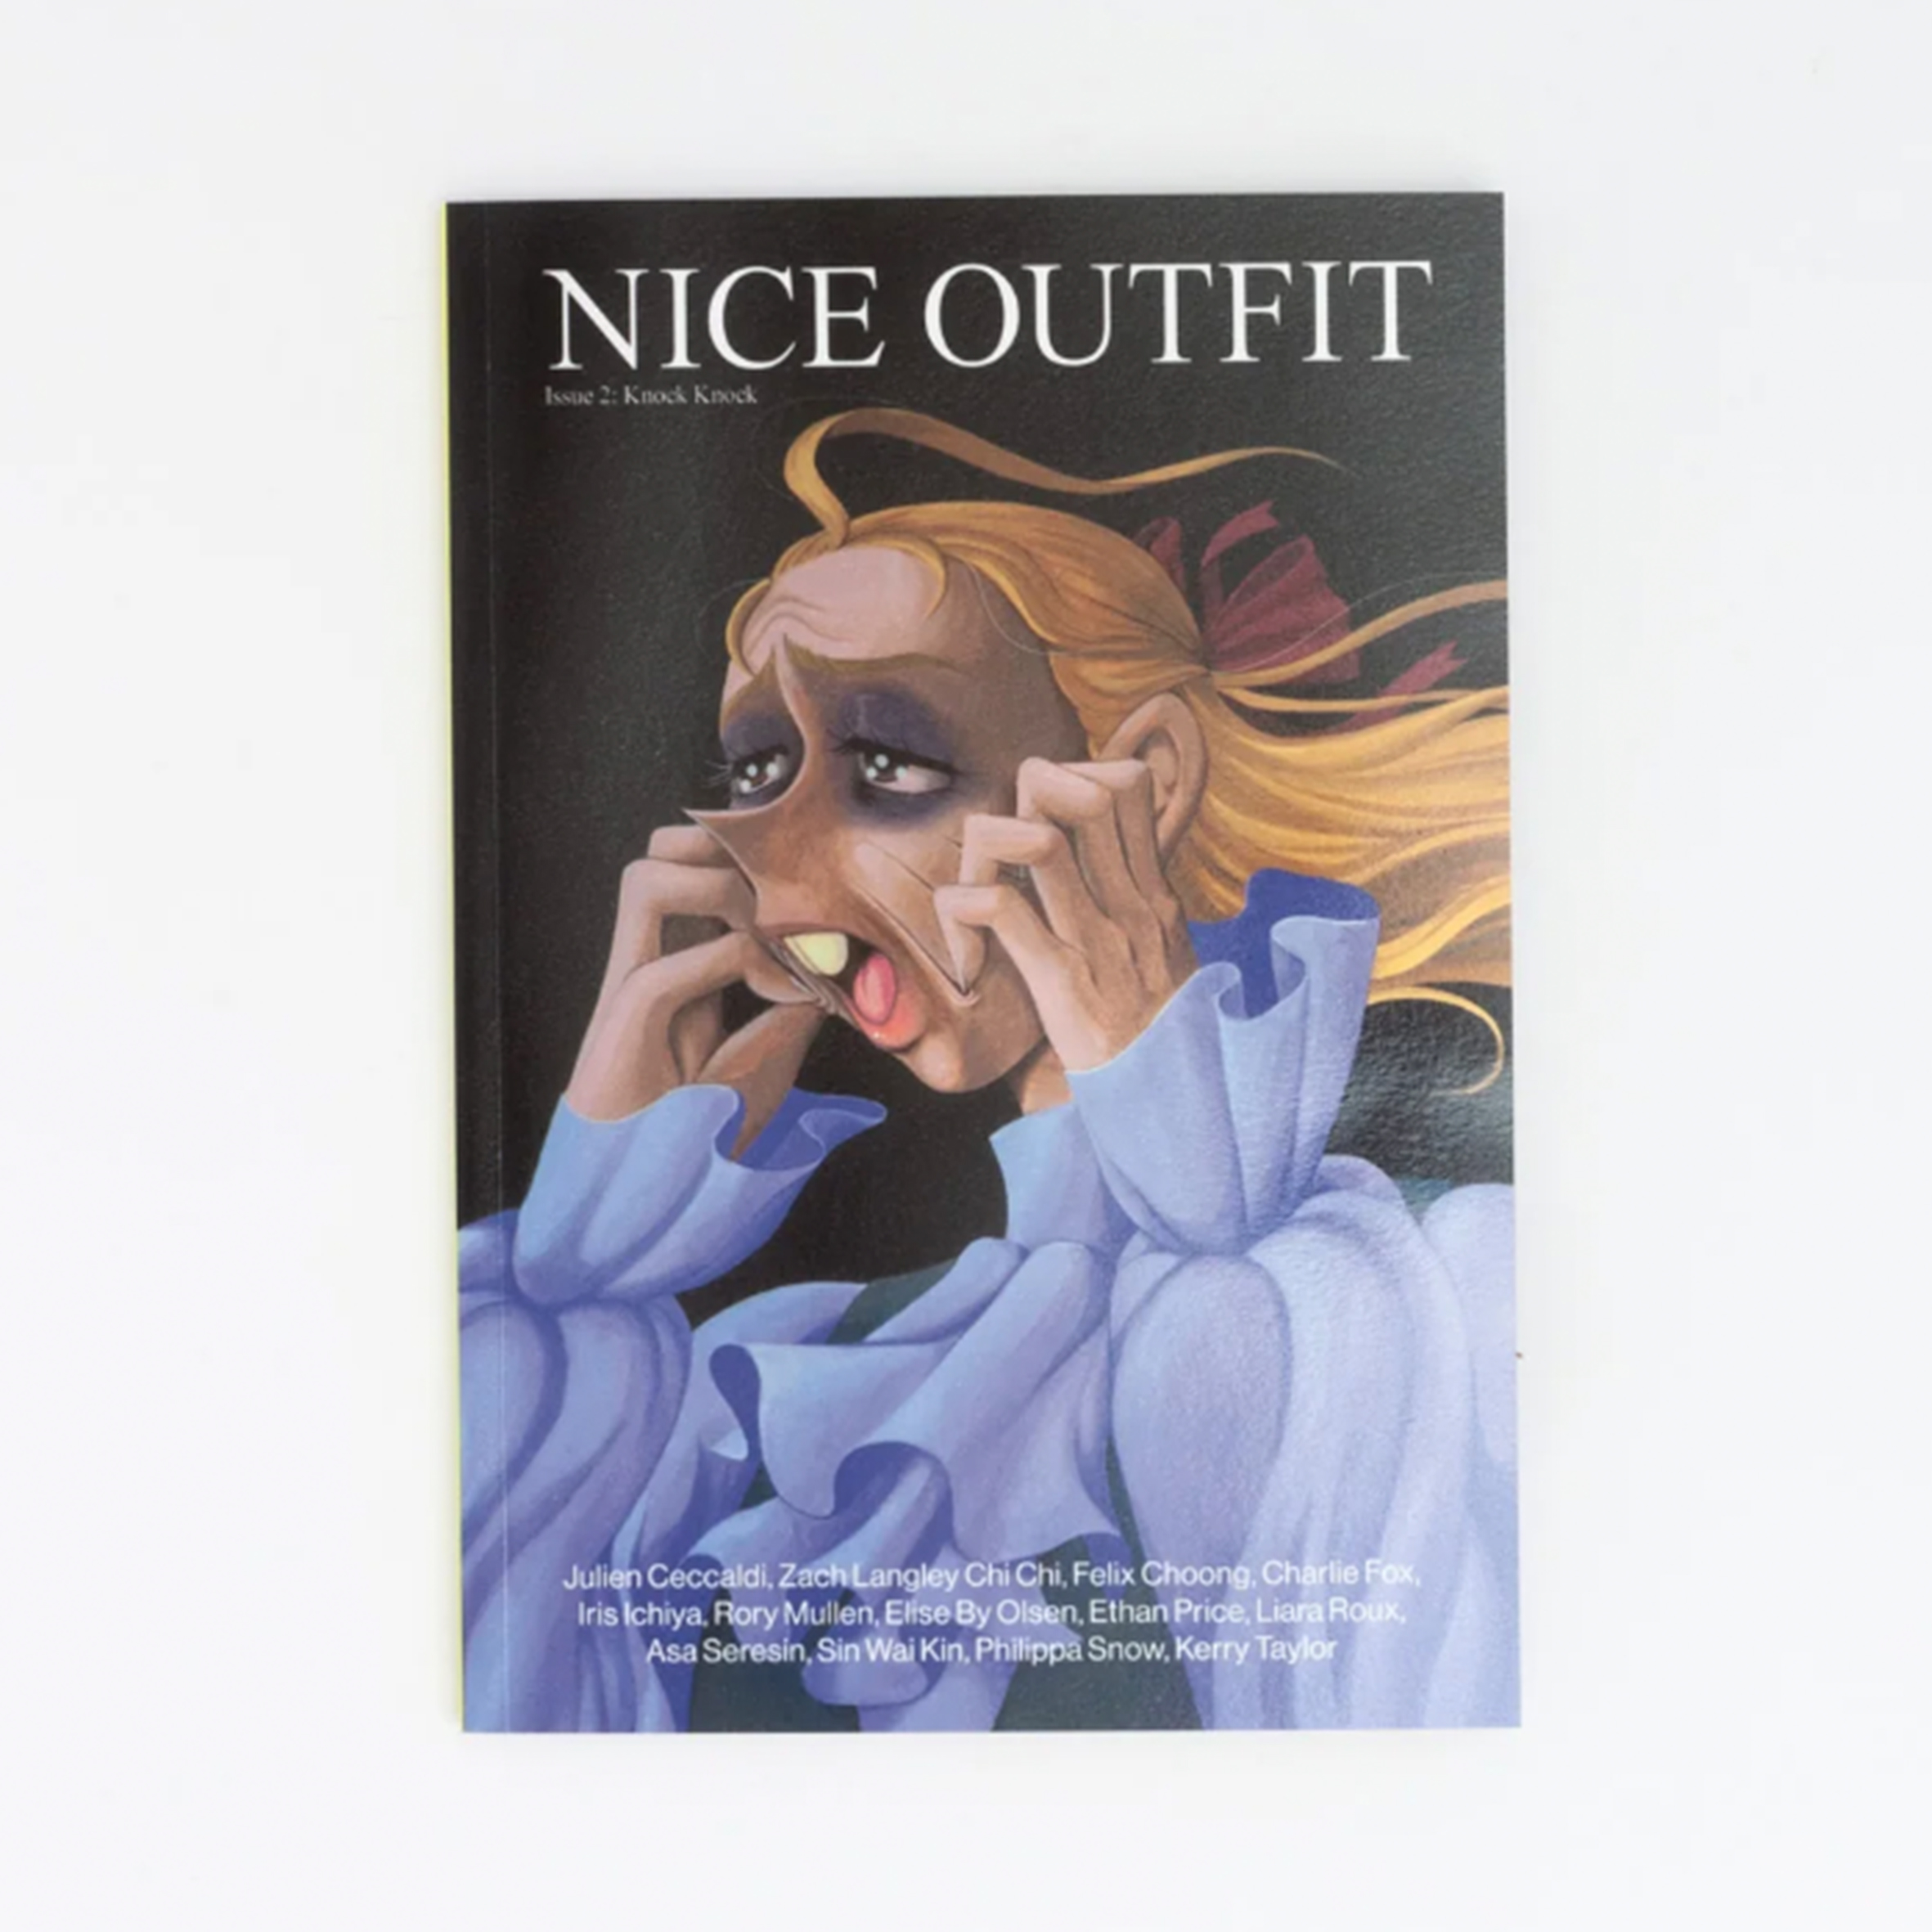  Issue 2